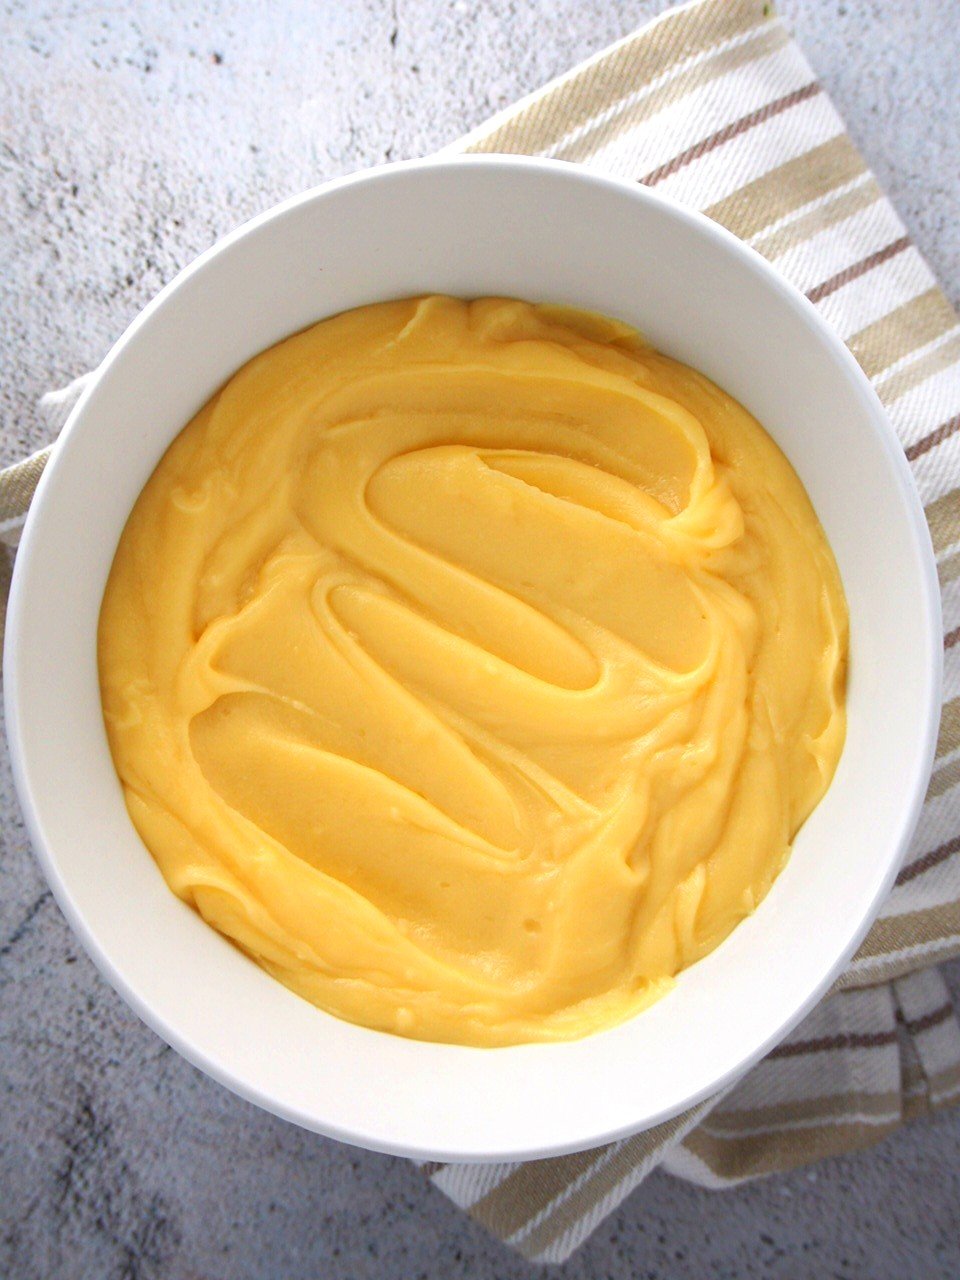 The yema (condensed milk) frosting in a bowl.